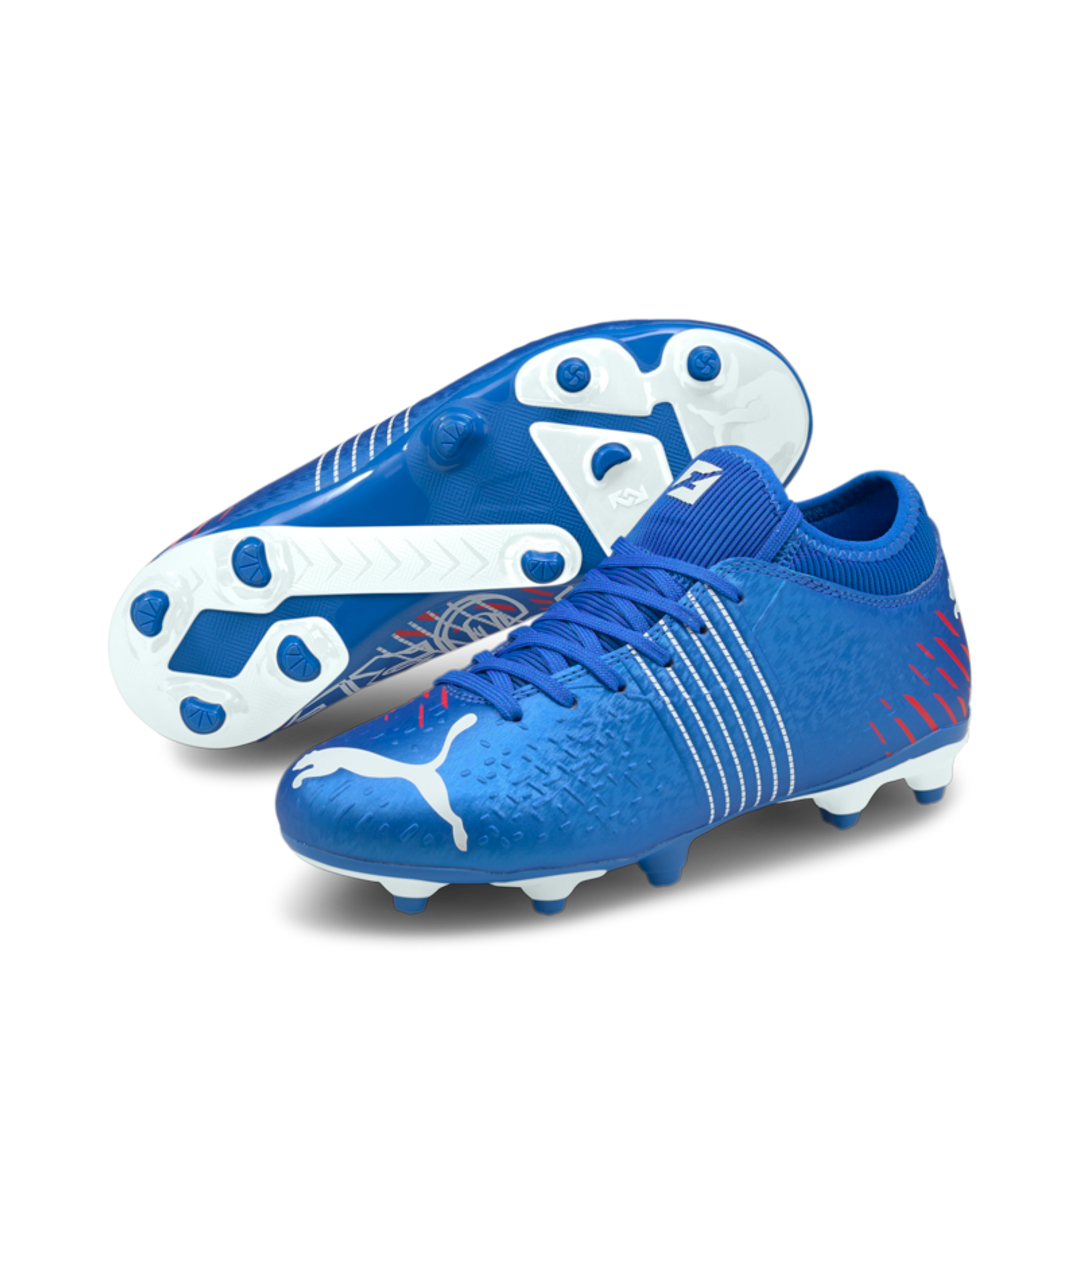 Puma Future Z 4.2 Firm Ground Soccer Cleats Youth Version 01/Blue-White ...